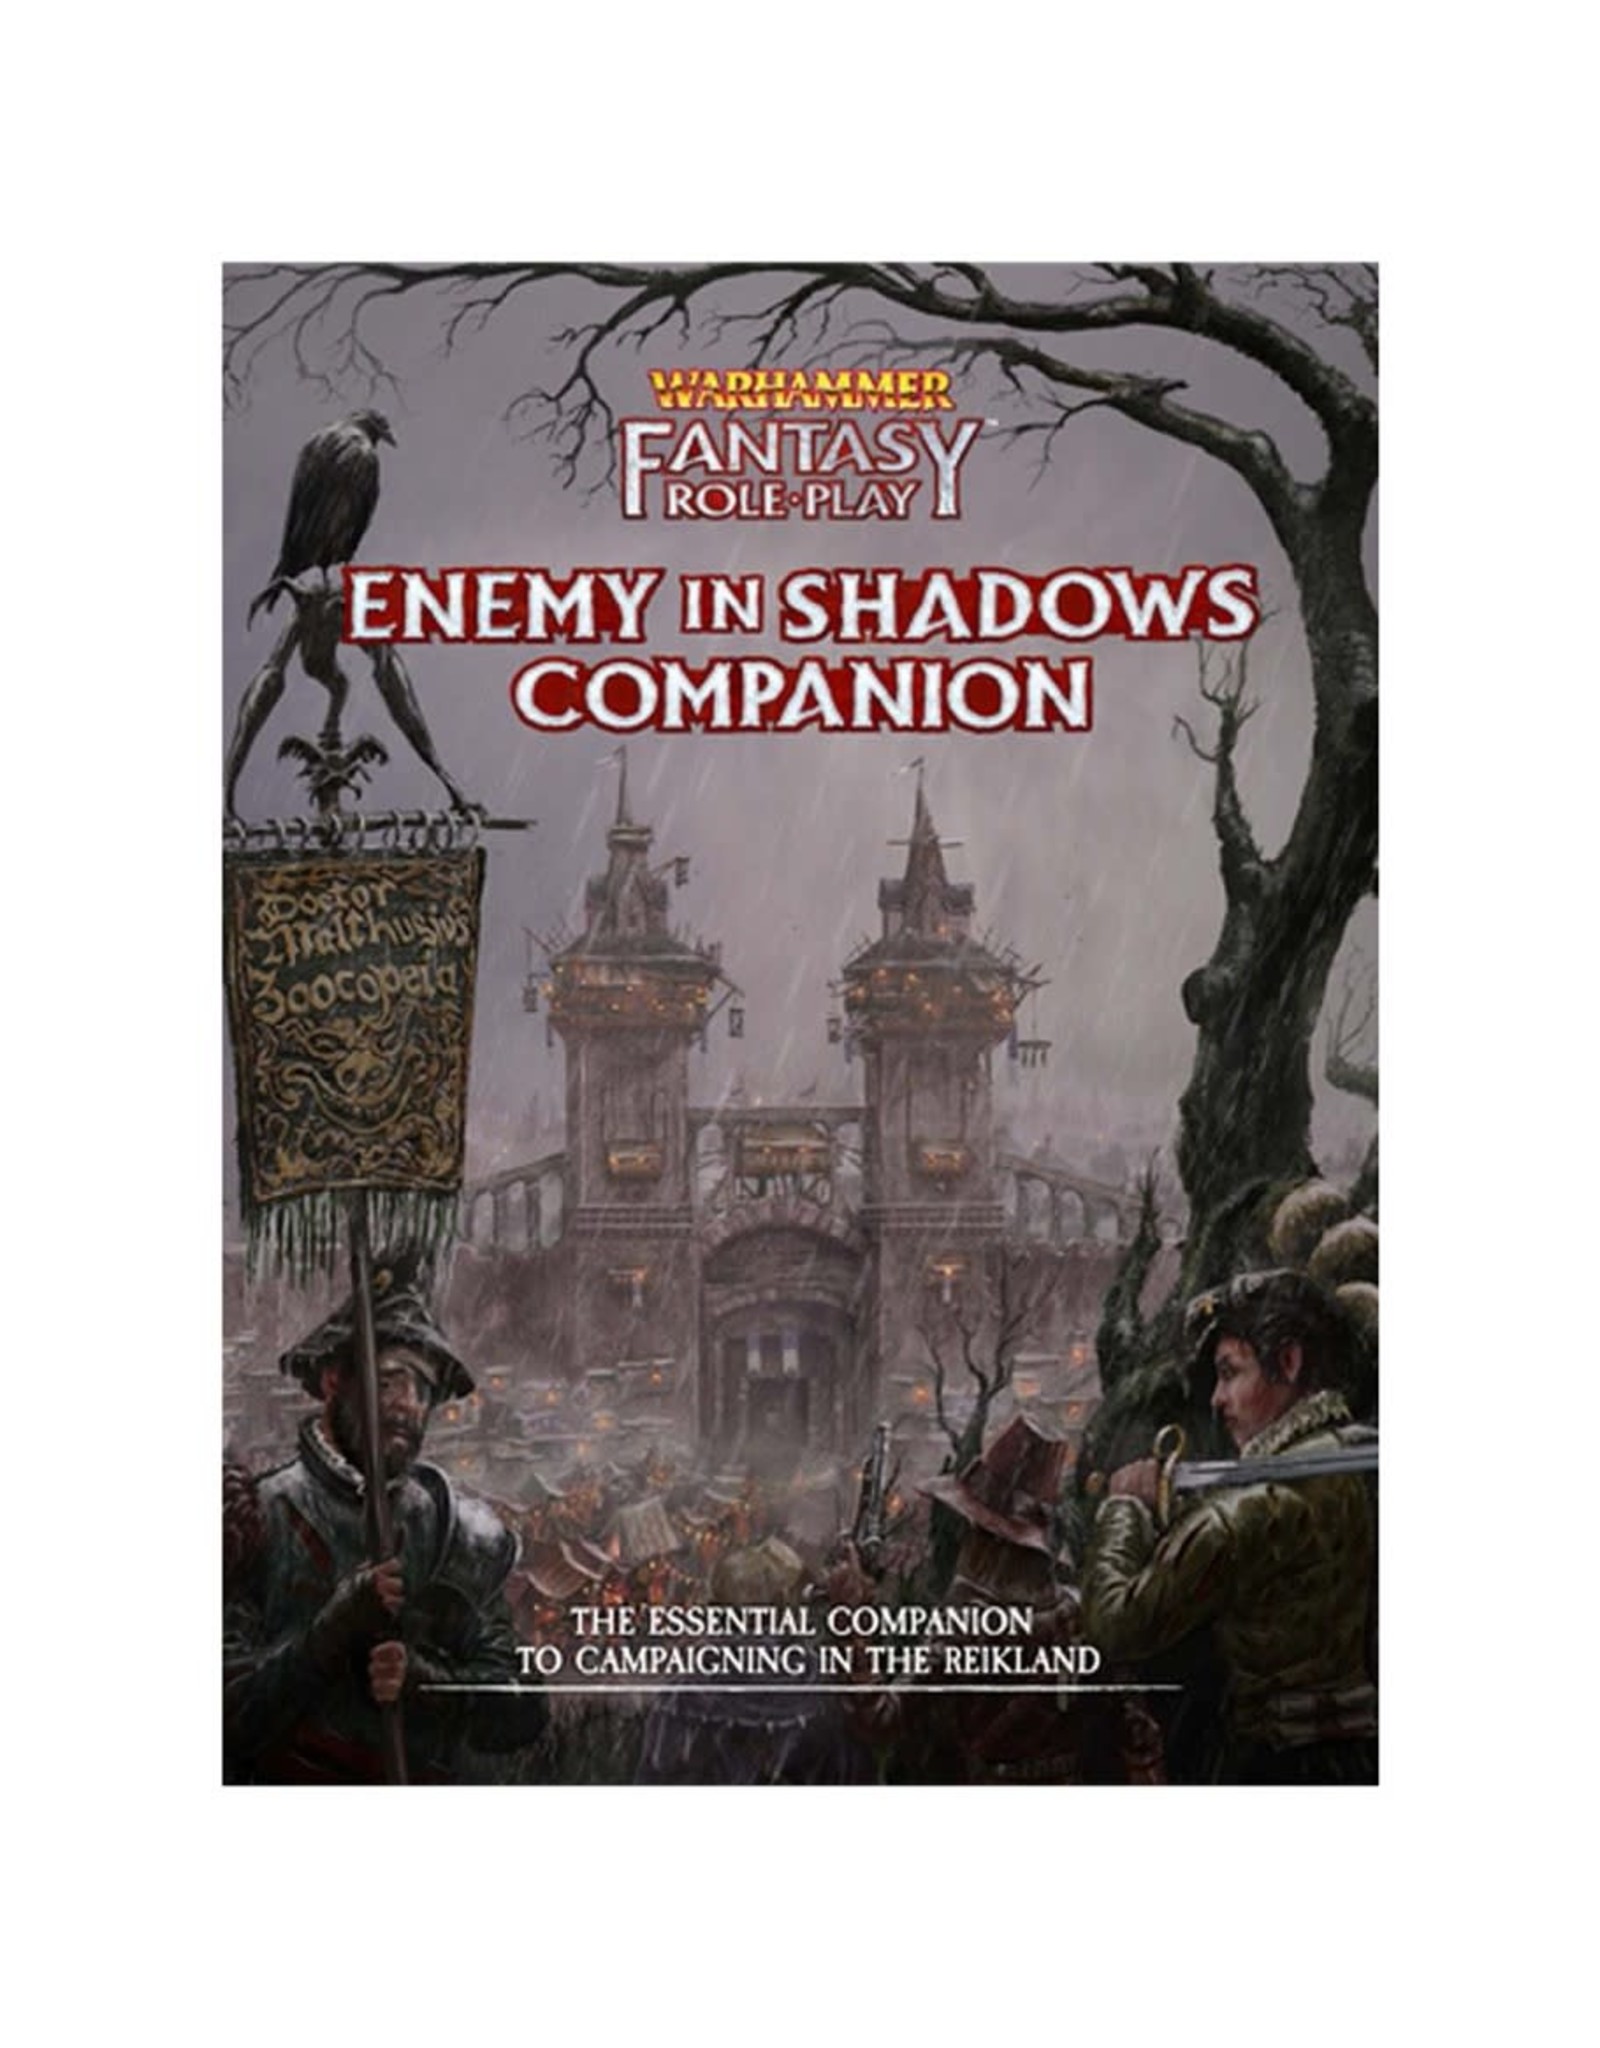 Cubicle Seven Warhammer Fantasy RPG: Enemy Within Vol 1 - Enemy in Shadows Companion